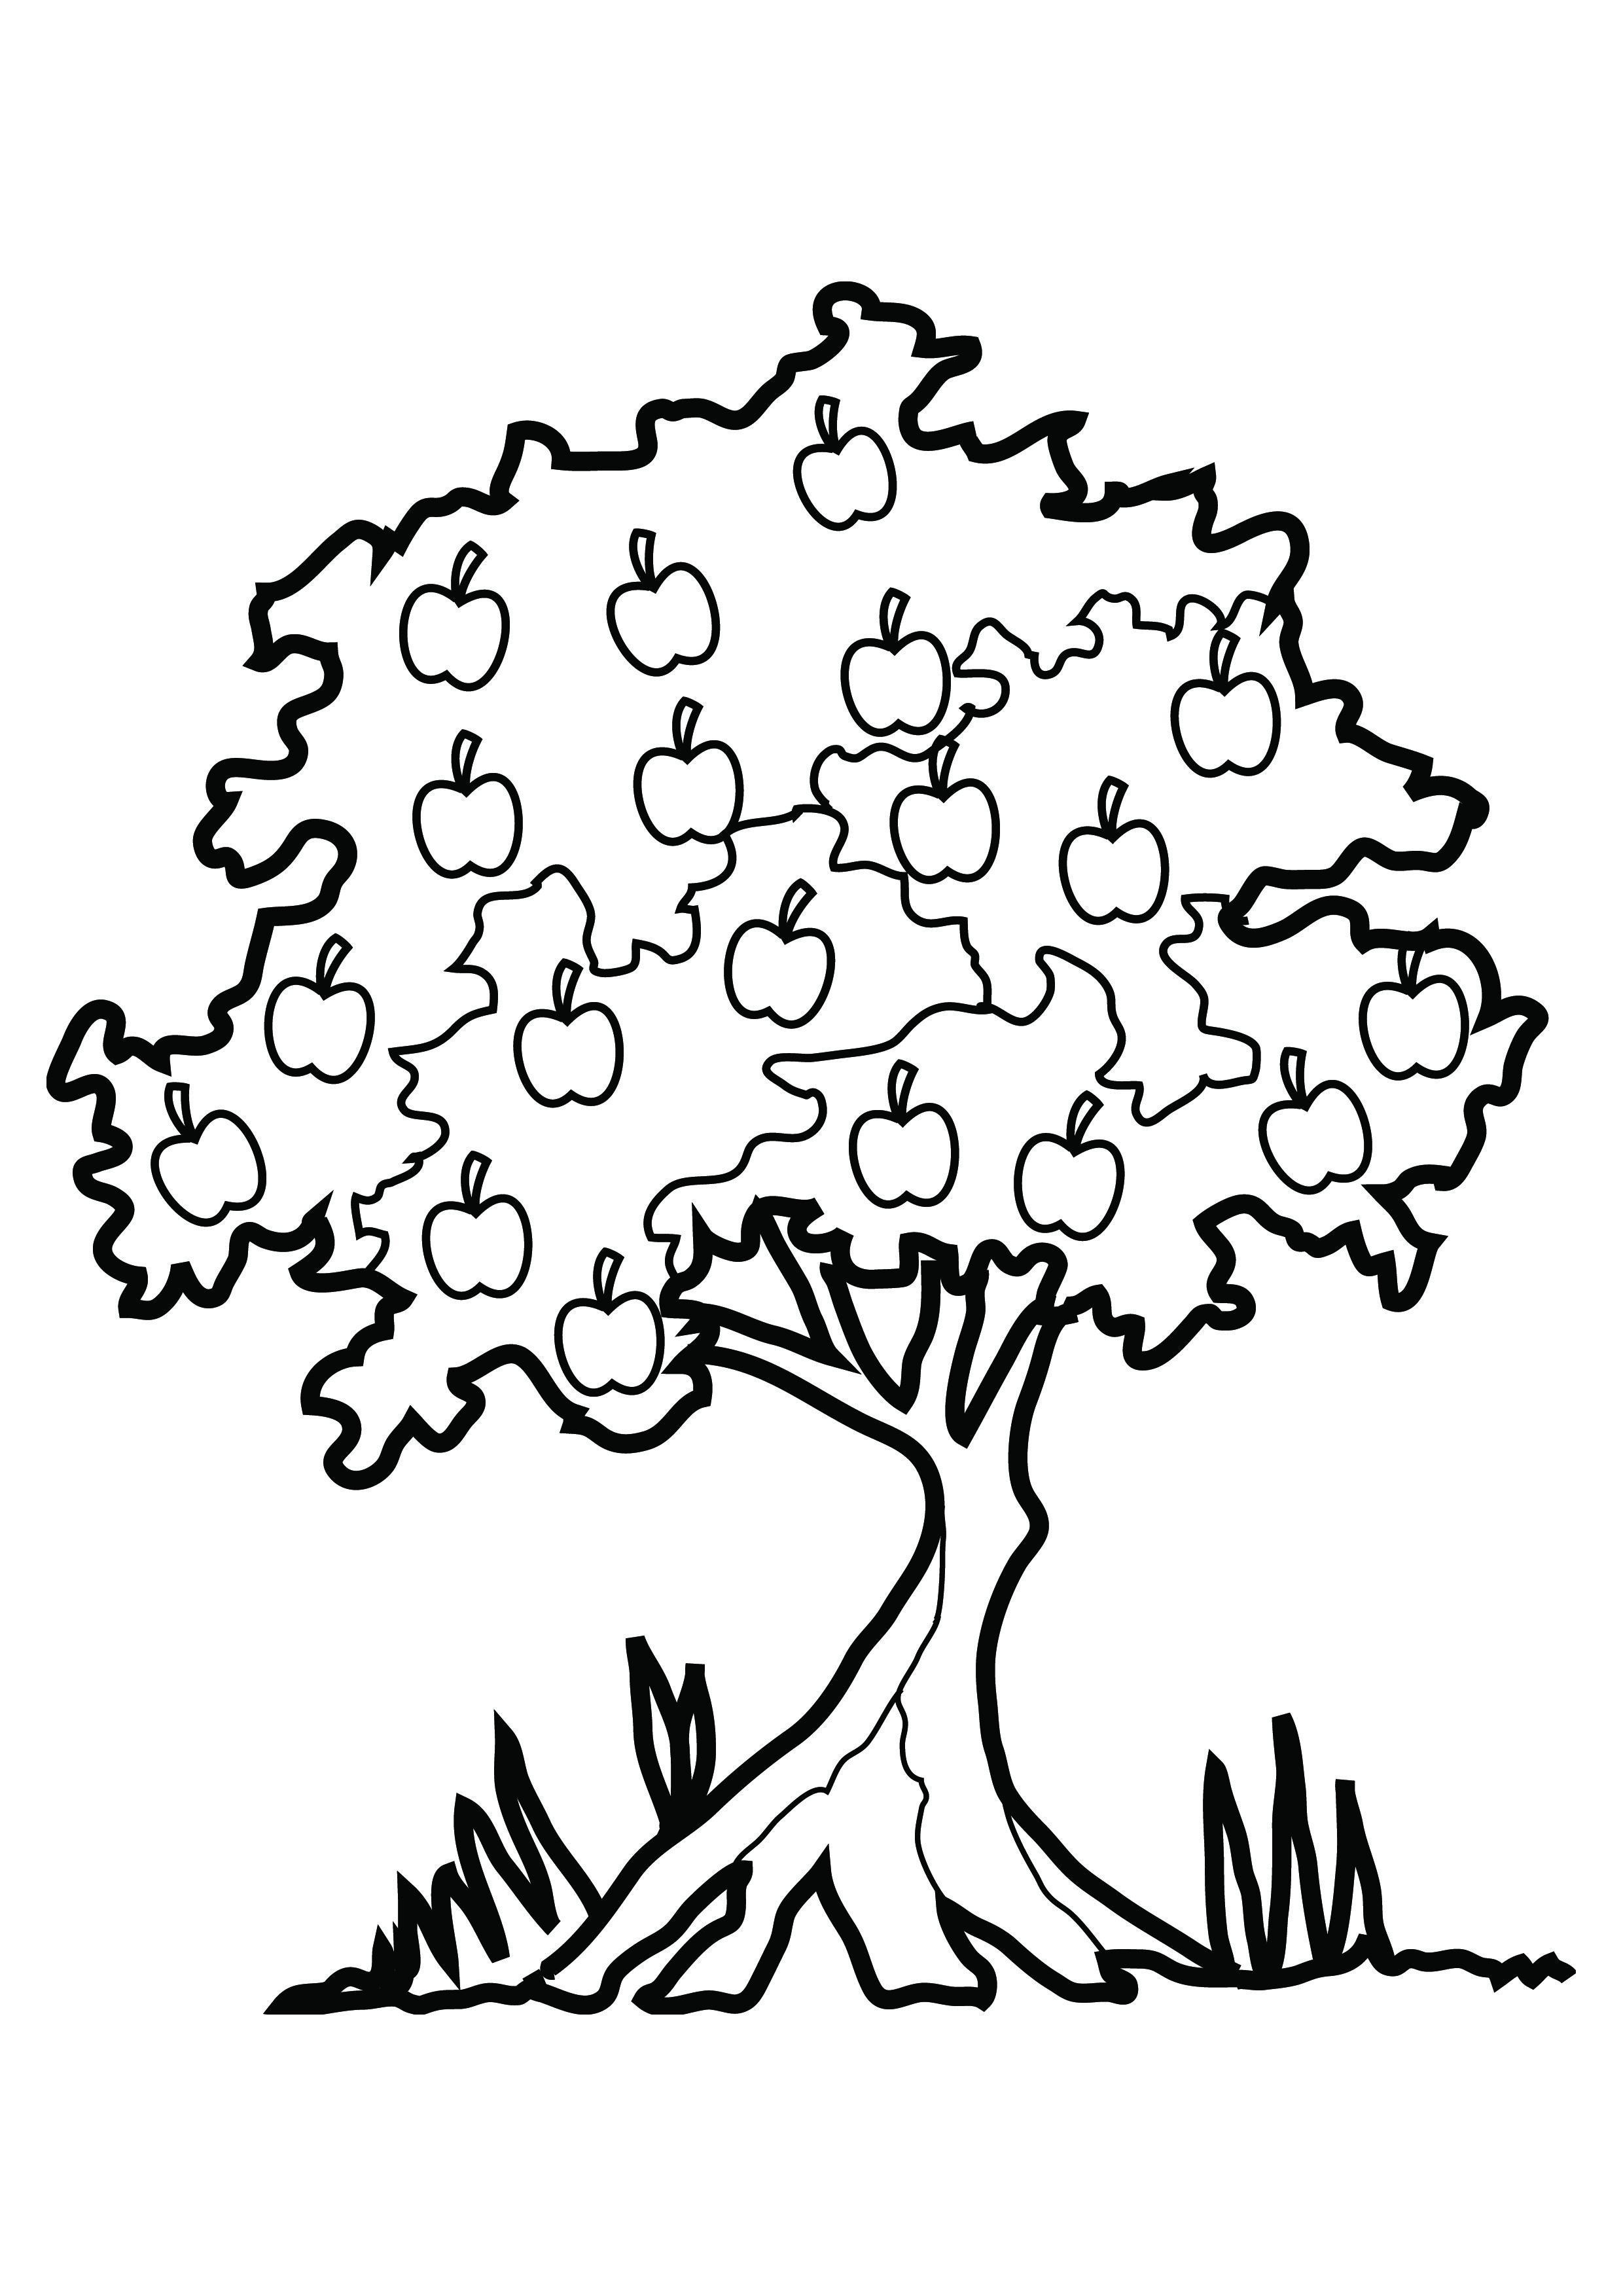 black-and-white-giving-tree-clipart-clipground